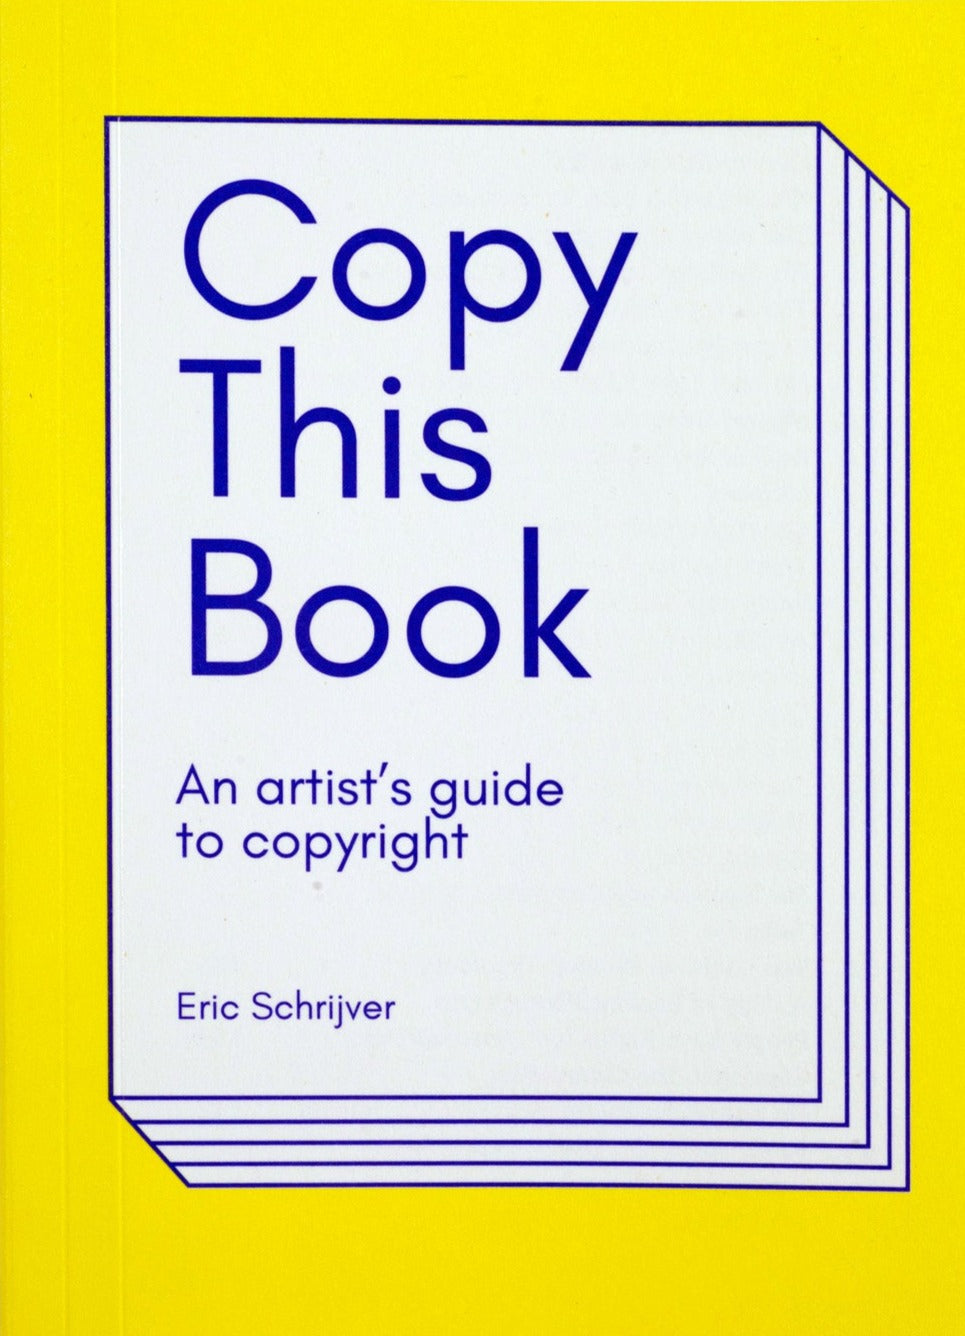 Copy this Book. An artist's guide to copyright